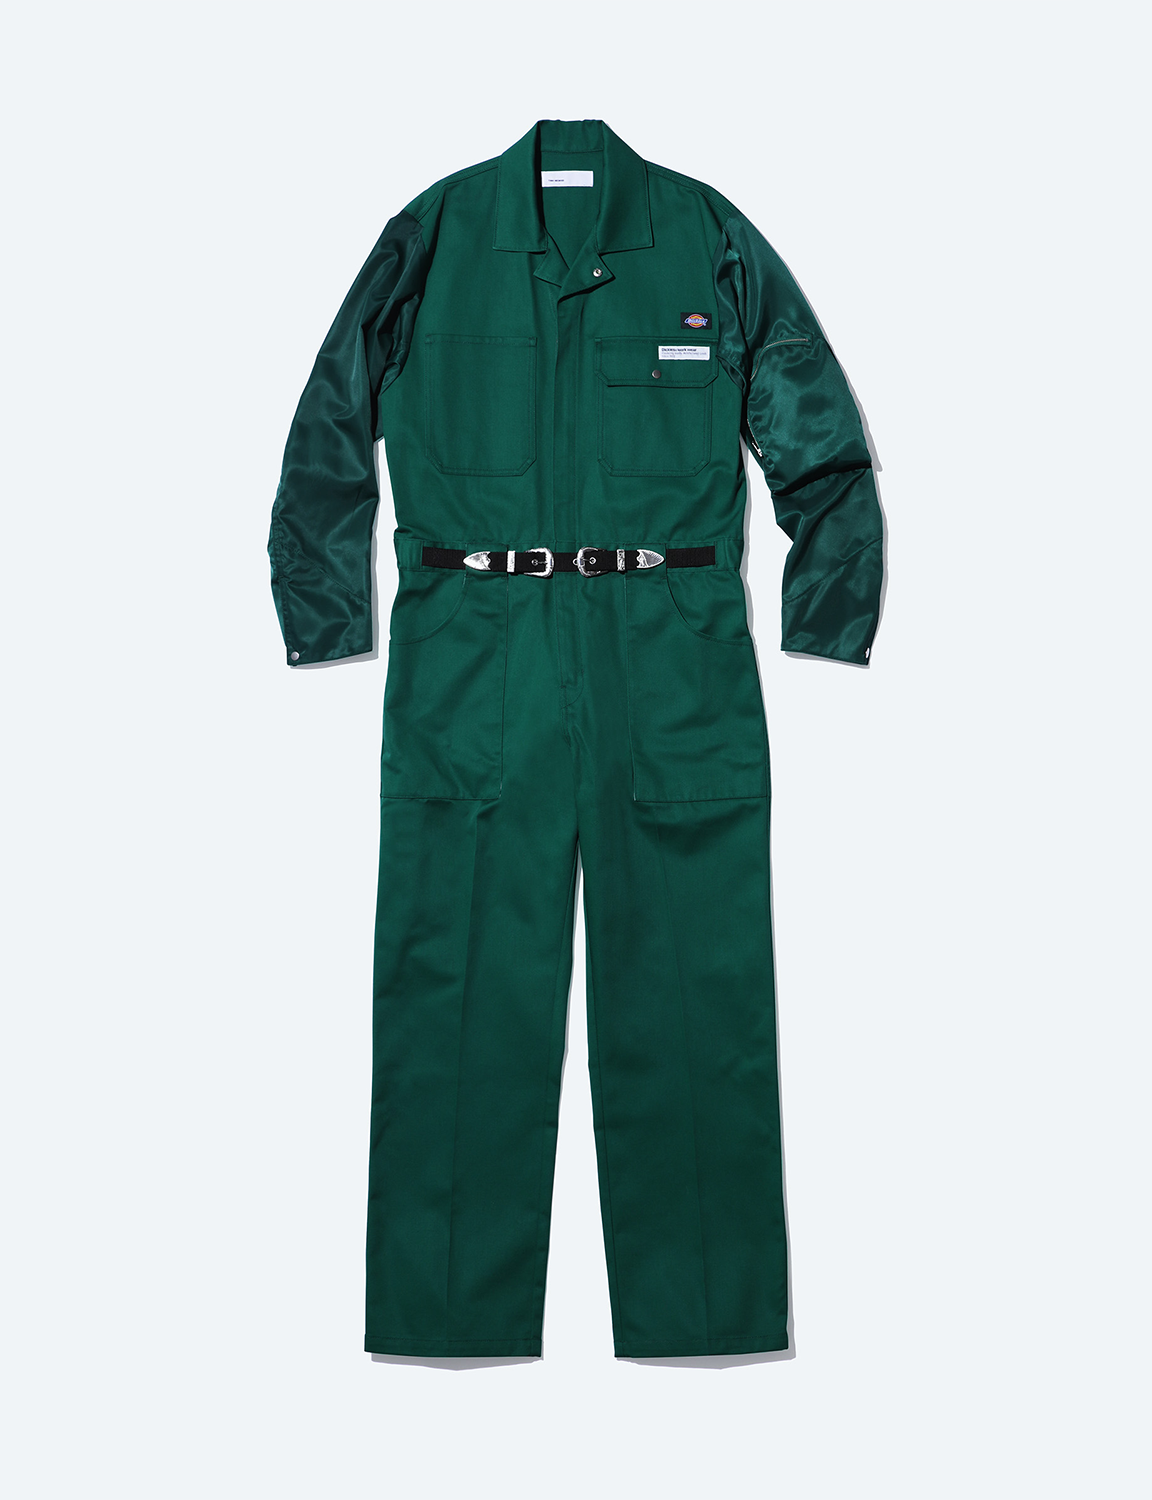 TOGA ARCHIVES - JUMPSUIT Dickies SP – The Contemporary Fix Kyoto